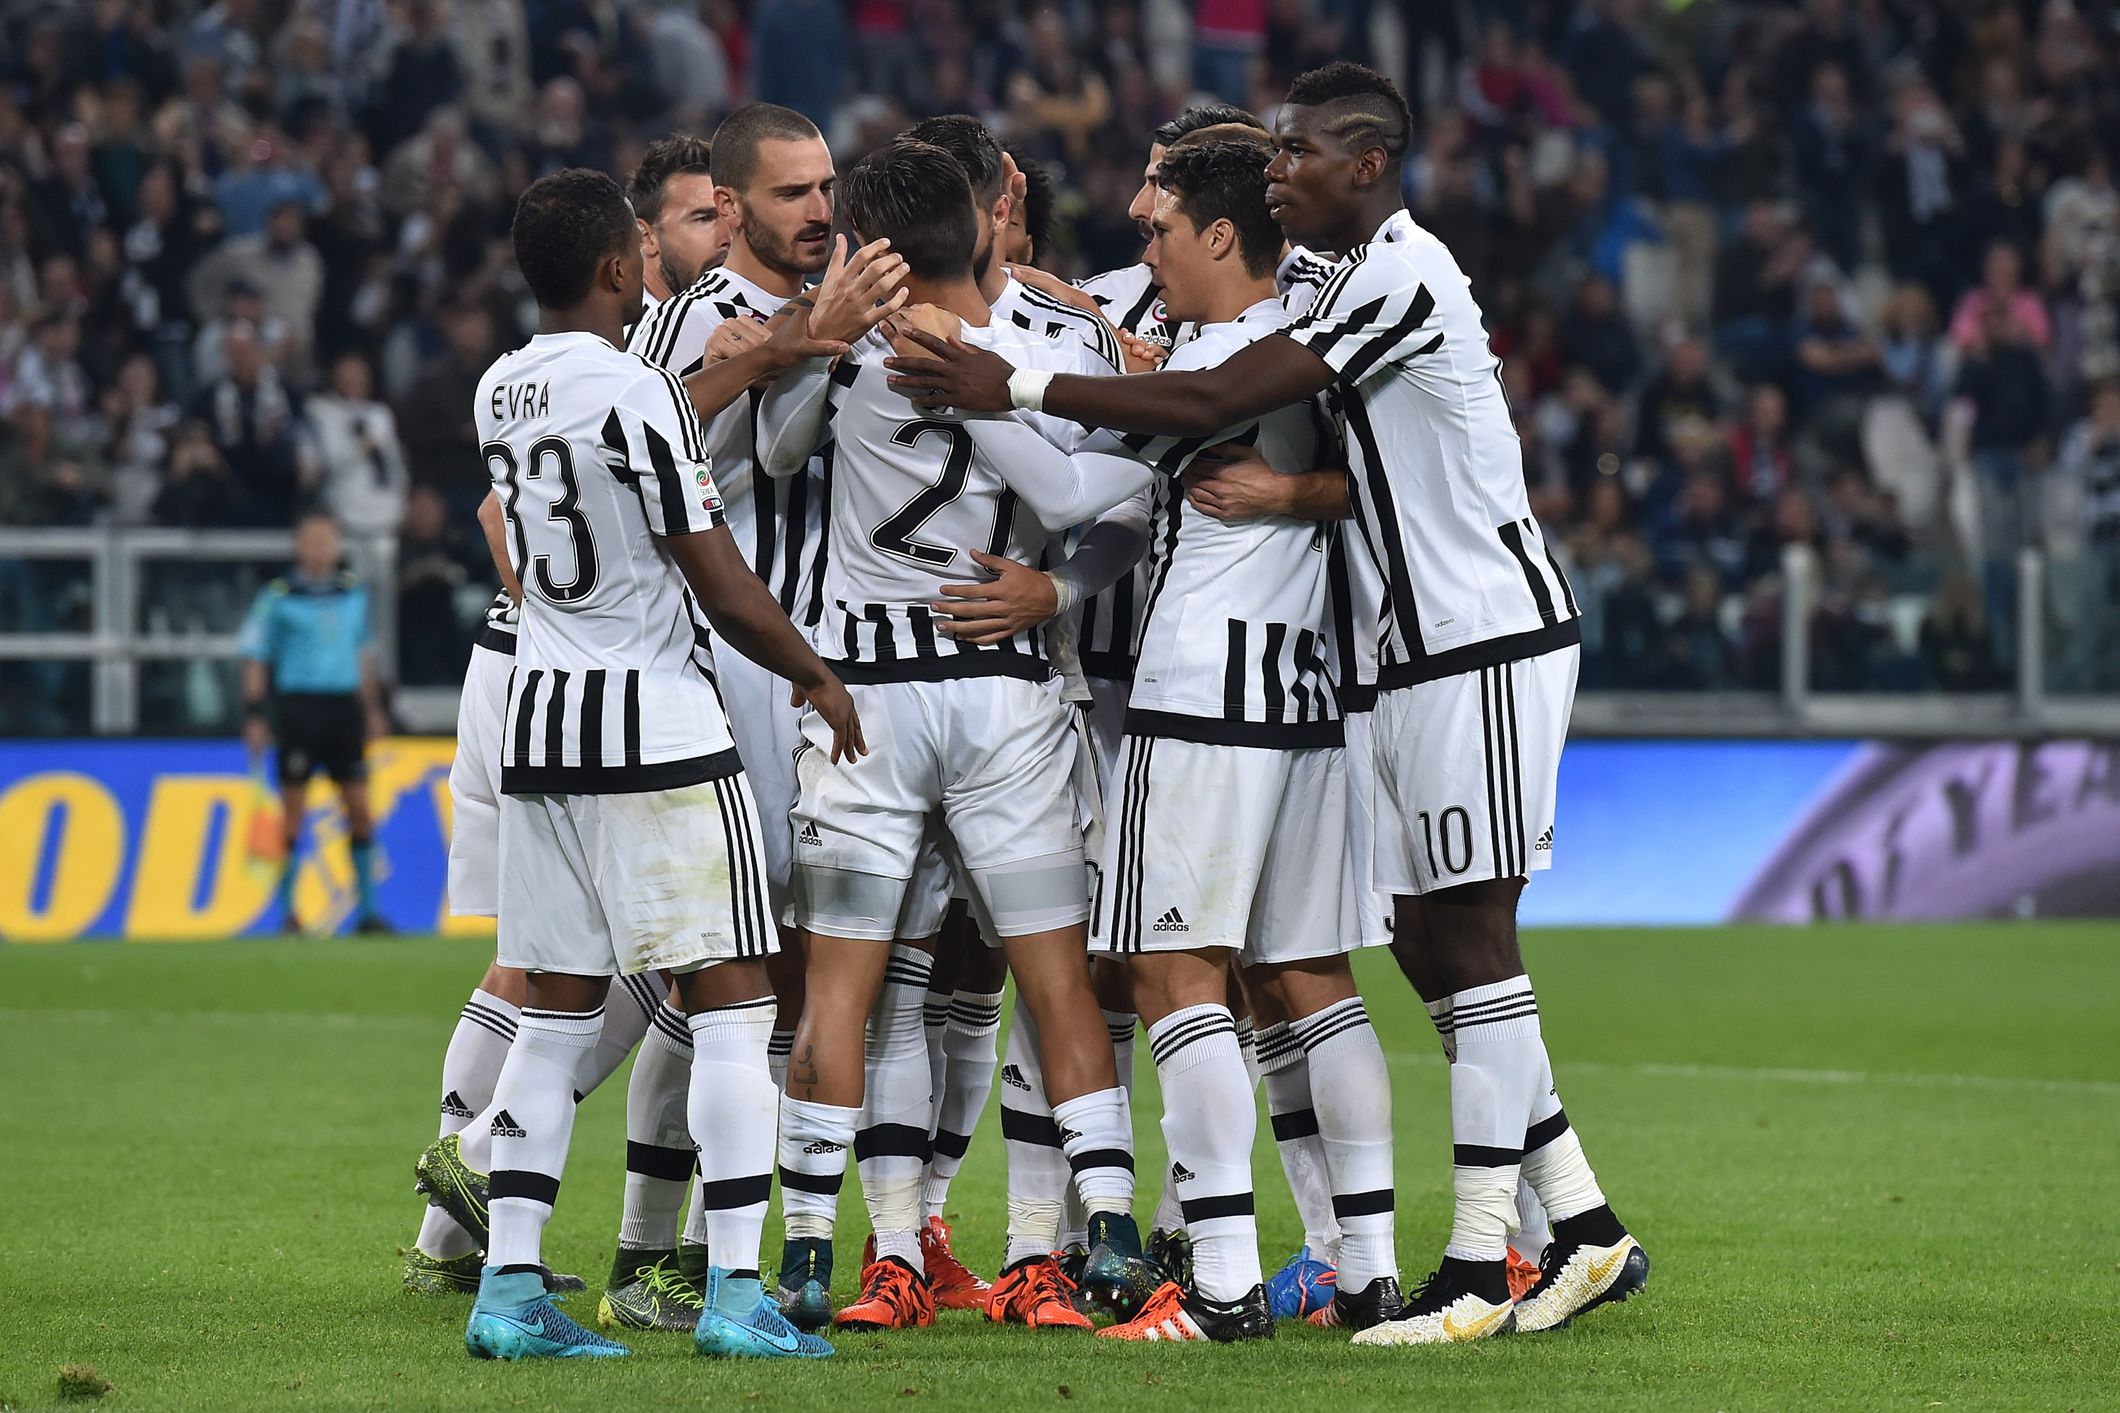 Juventus vs. Inter Milan 2015 live stream: Time, TV schedule, and how